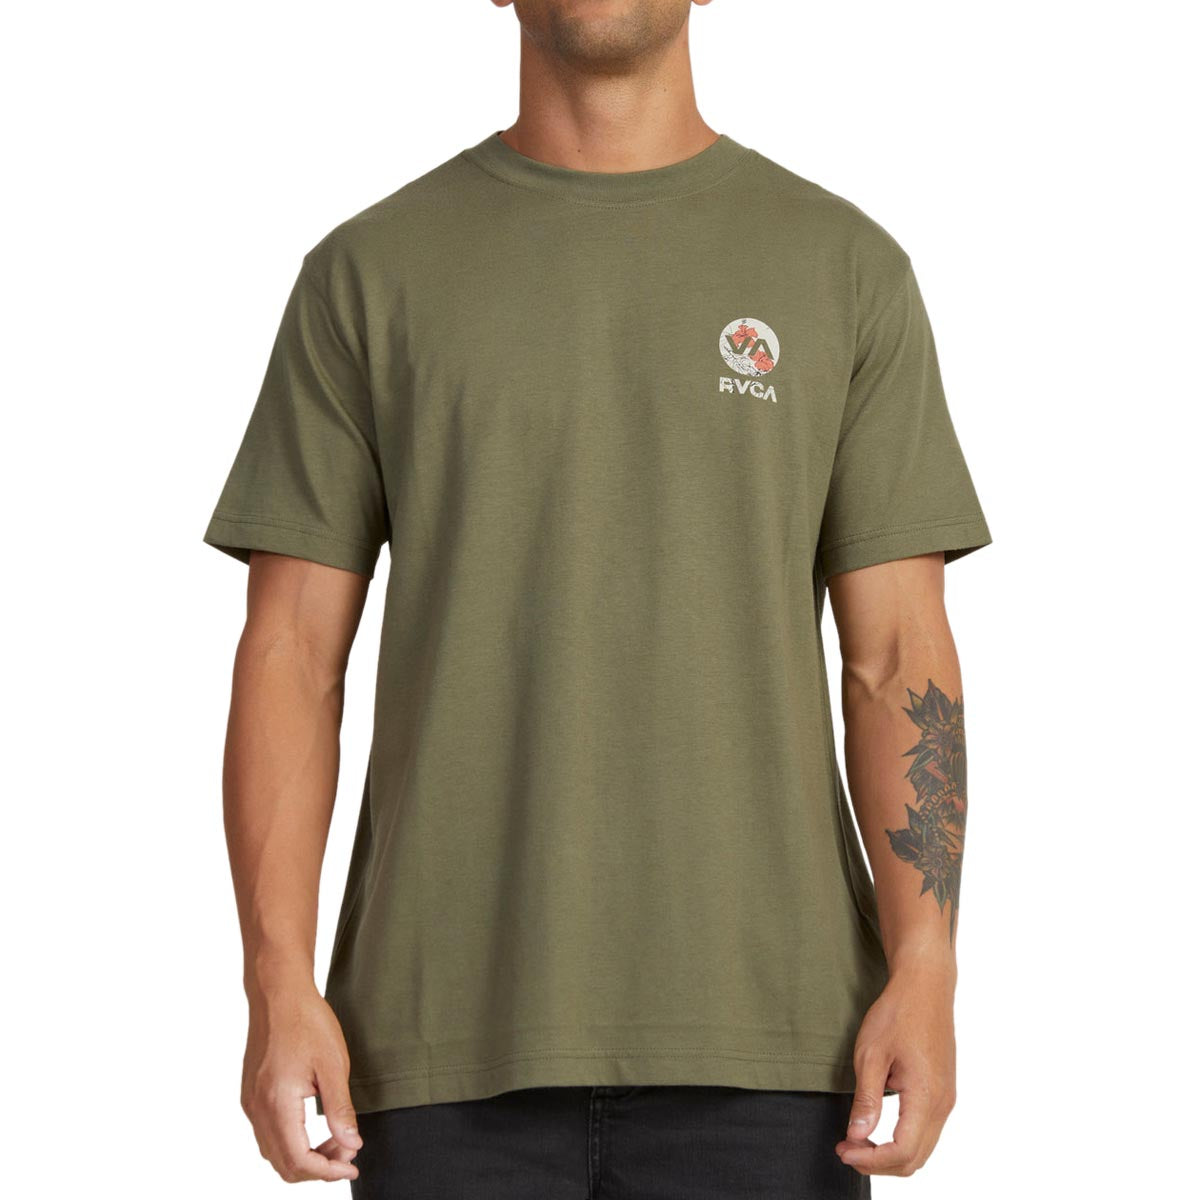 RVCA Drawn In T-Shirt - Olive image 3